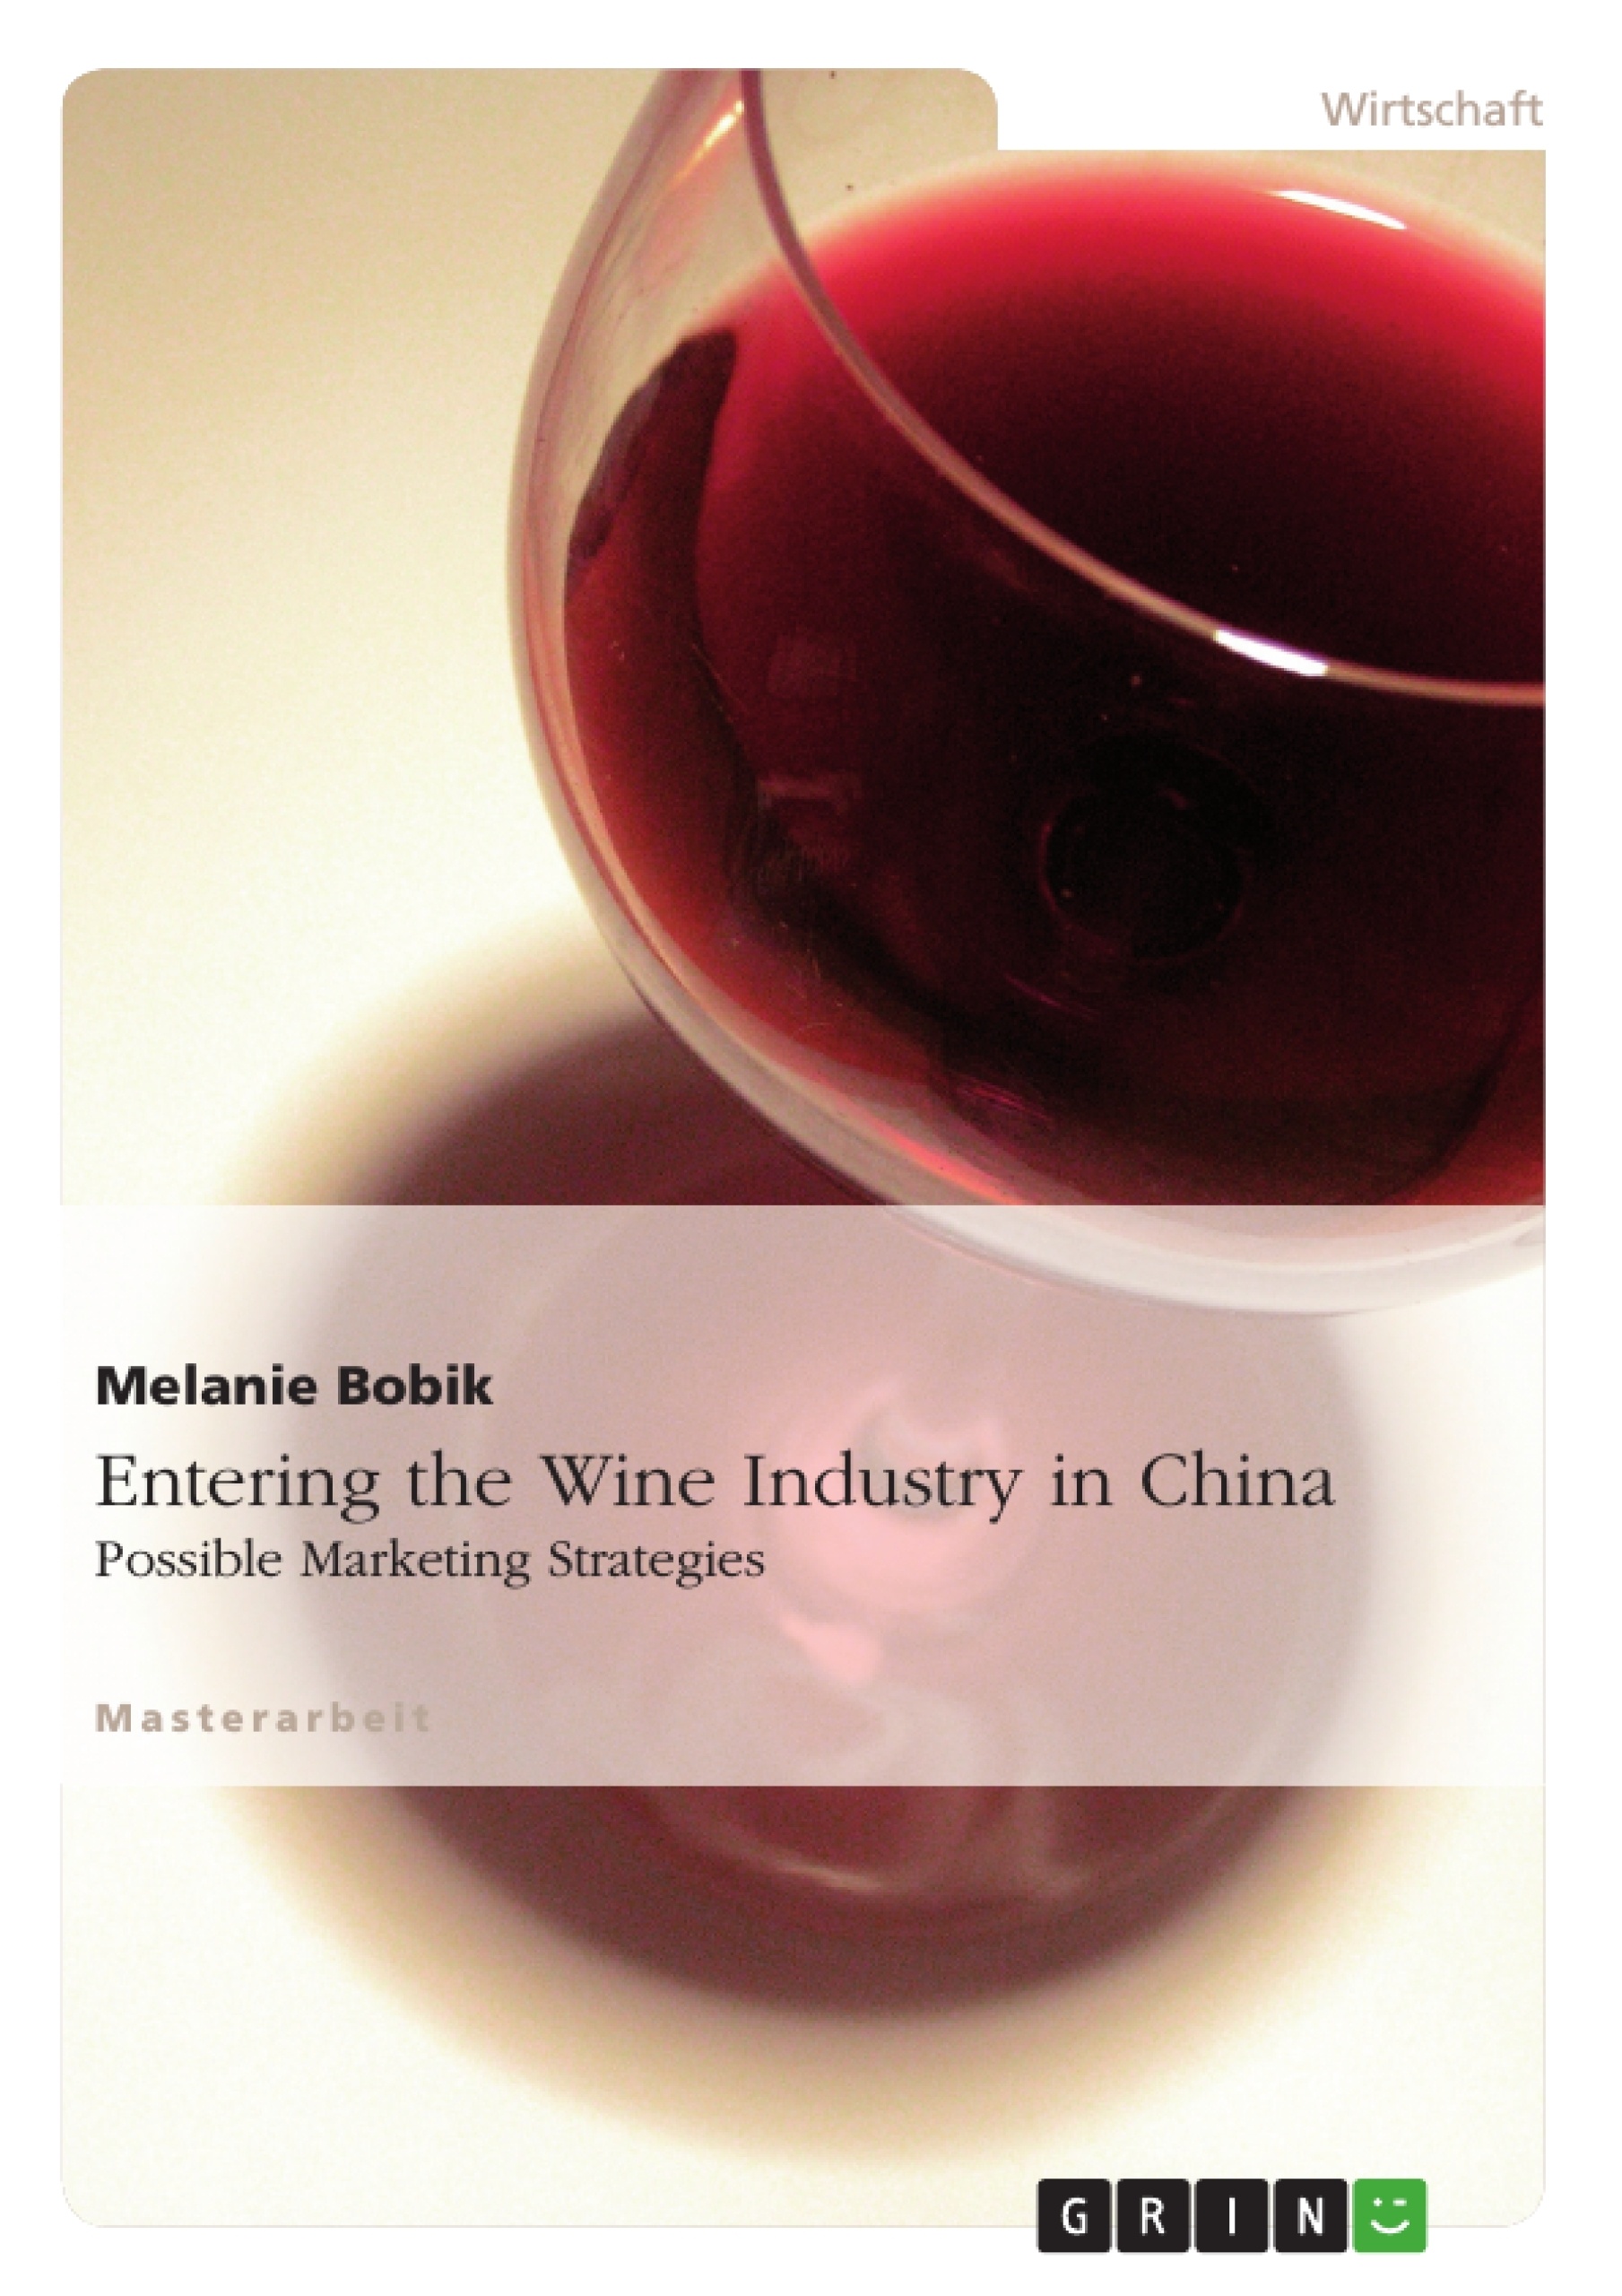 Title: Entering the Wine Industry in China